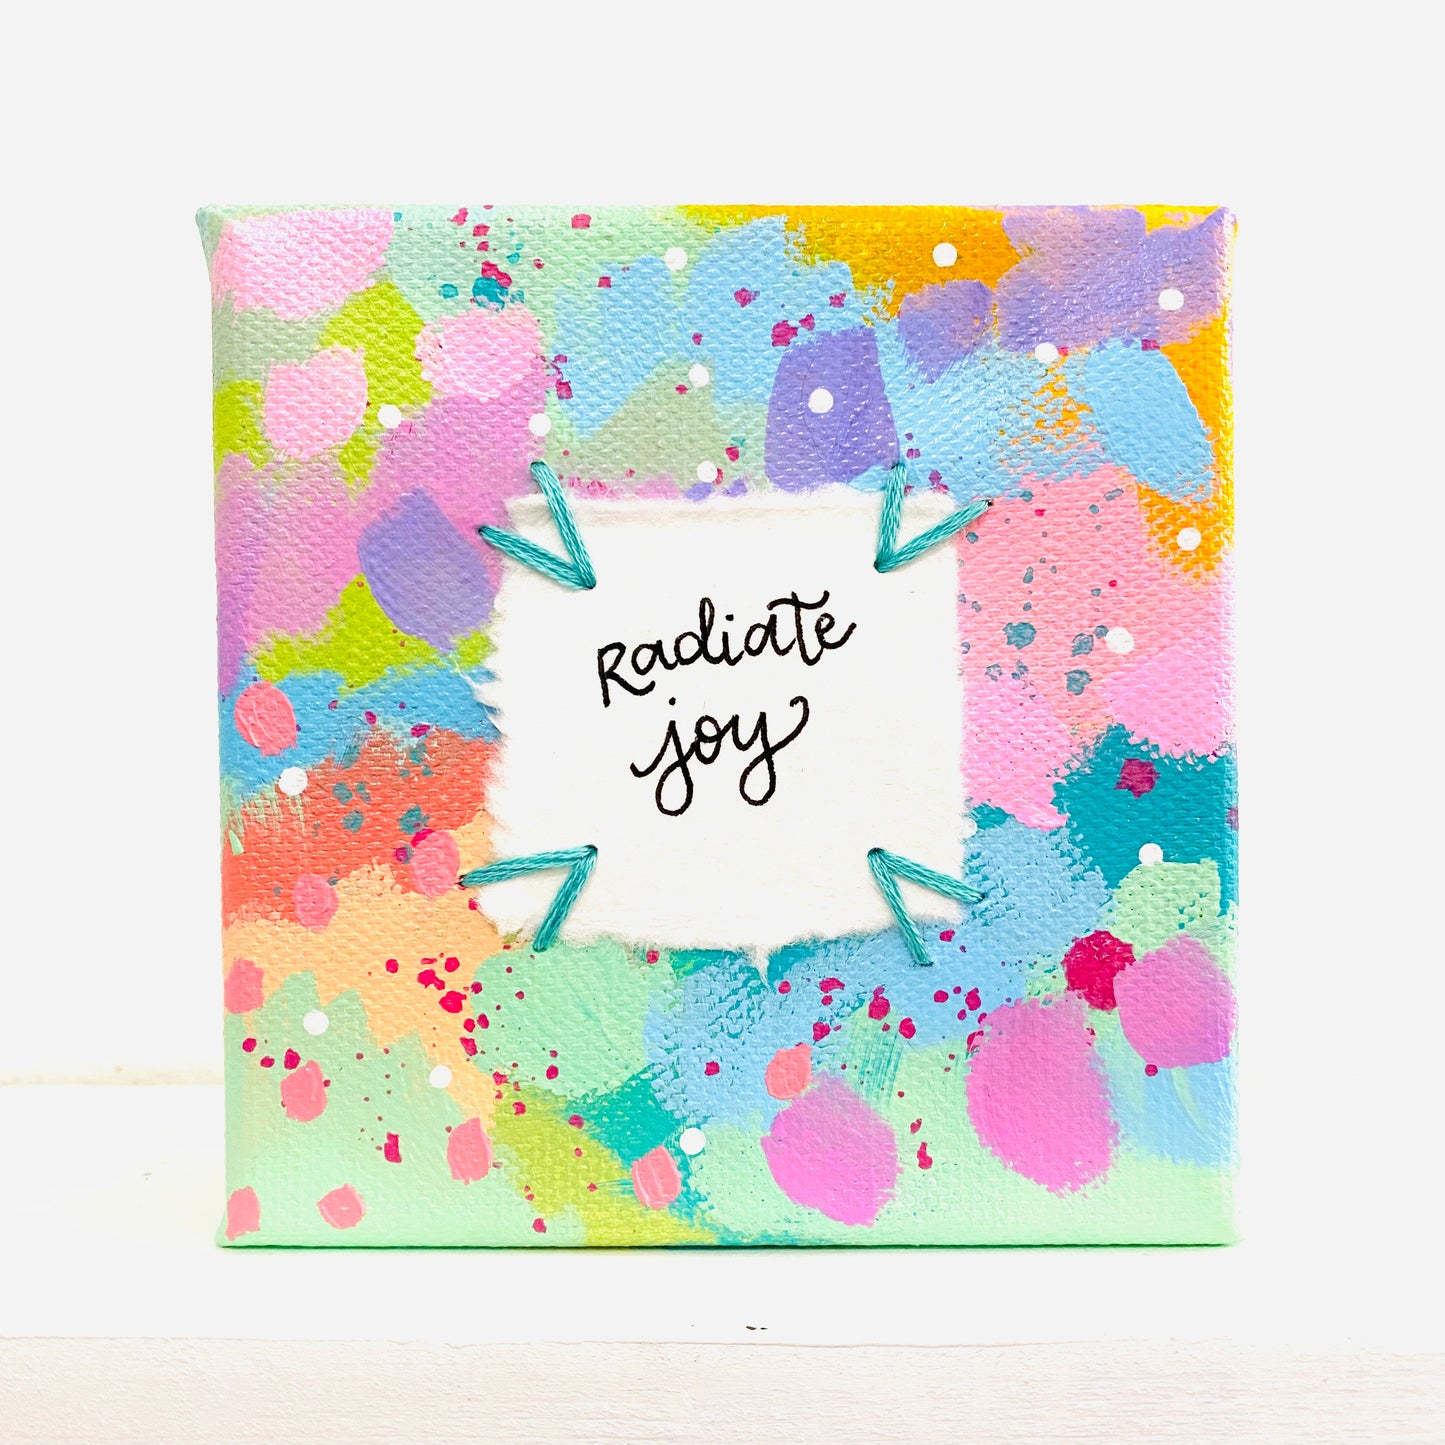 Radiate Joy 4x4 inch original abstract canvas with embroidery thread accents